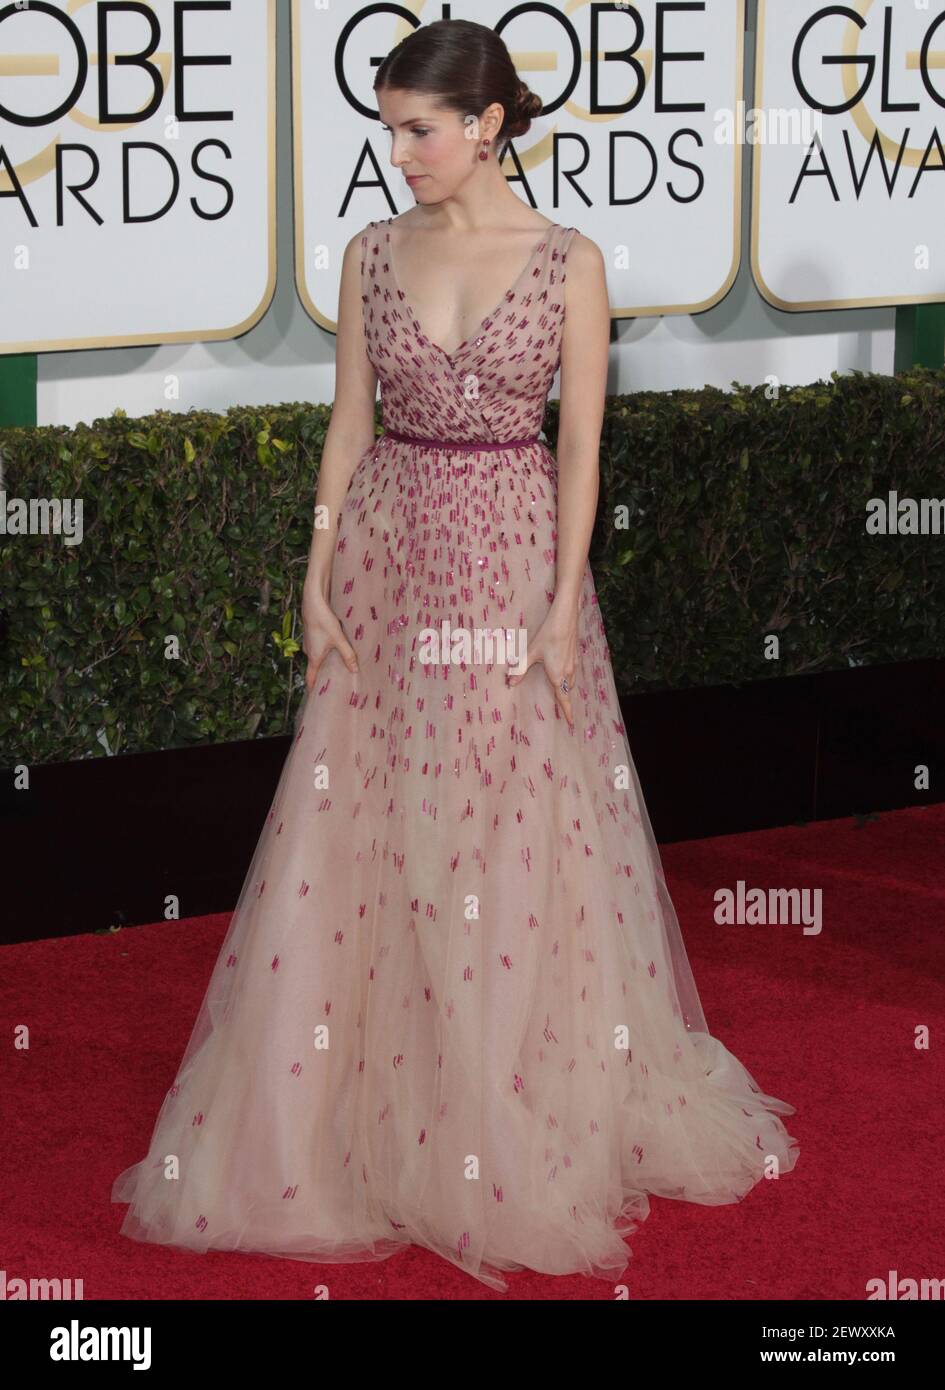 Actress Anna Kendrick Arrives At The 72nd Annual Golden Globe Awards Held At The Beverly Hilton